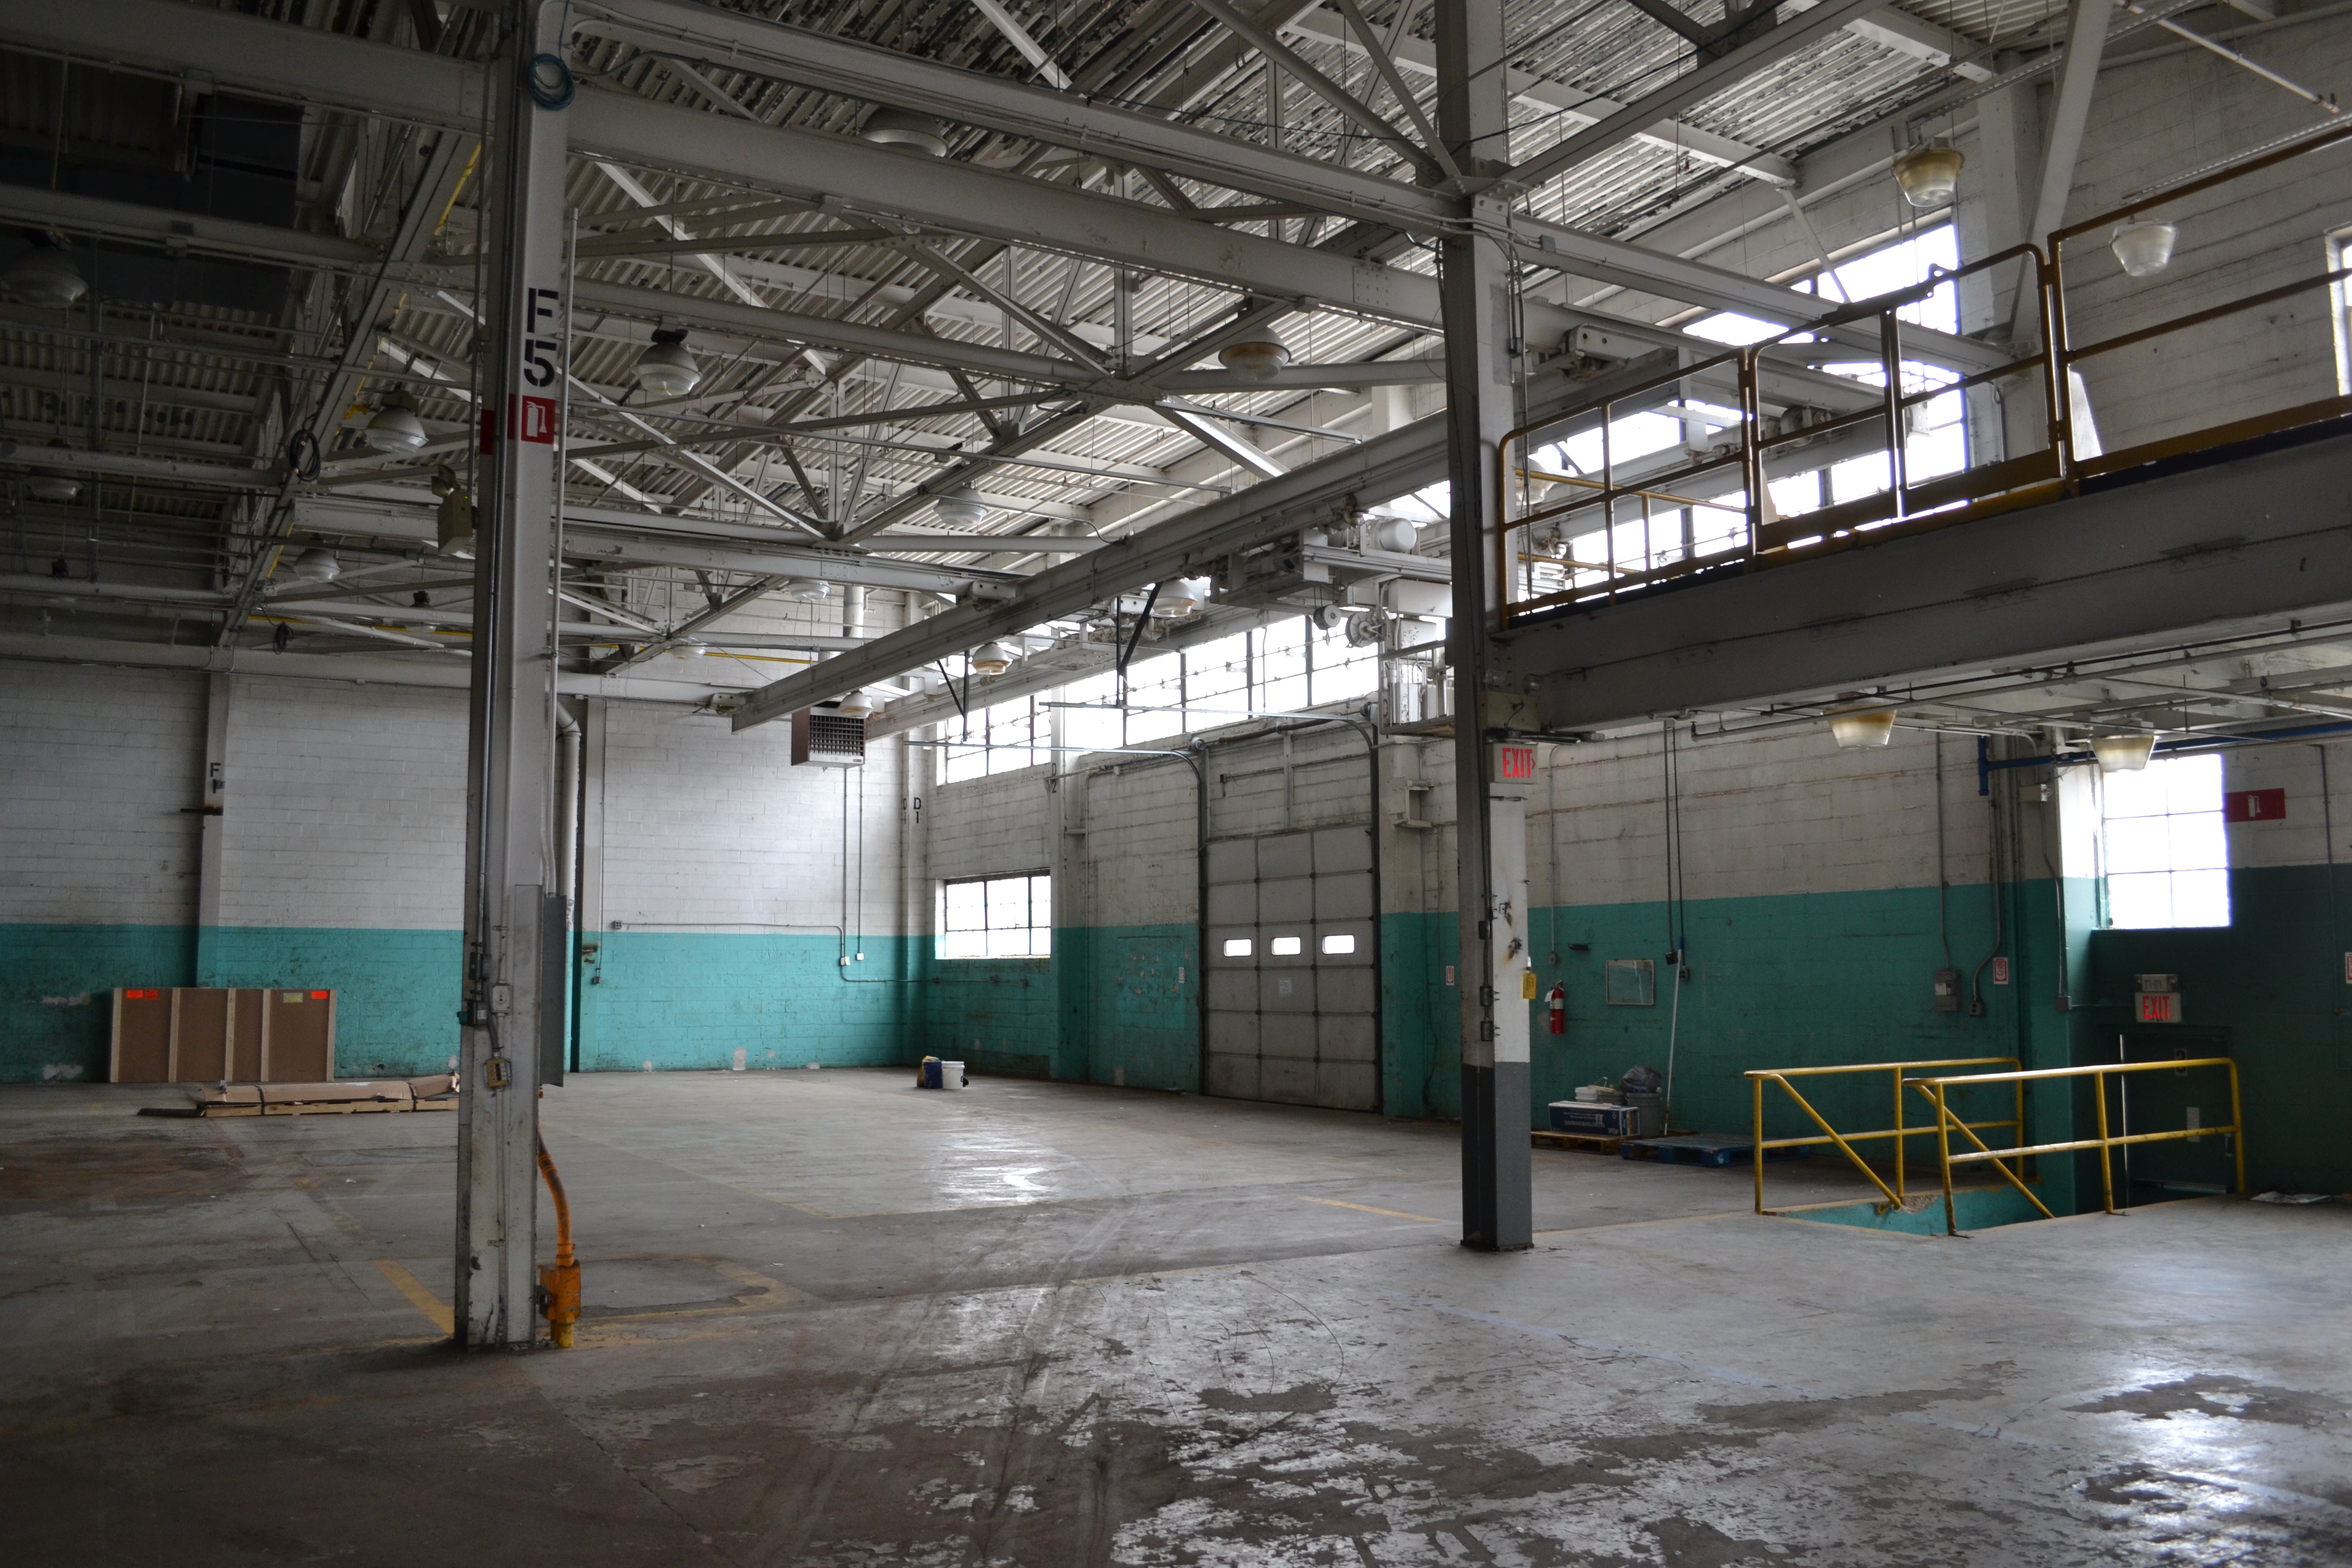 The warehouse offers a blank slate where Common Market will build walls to suit tenants